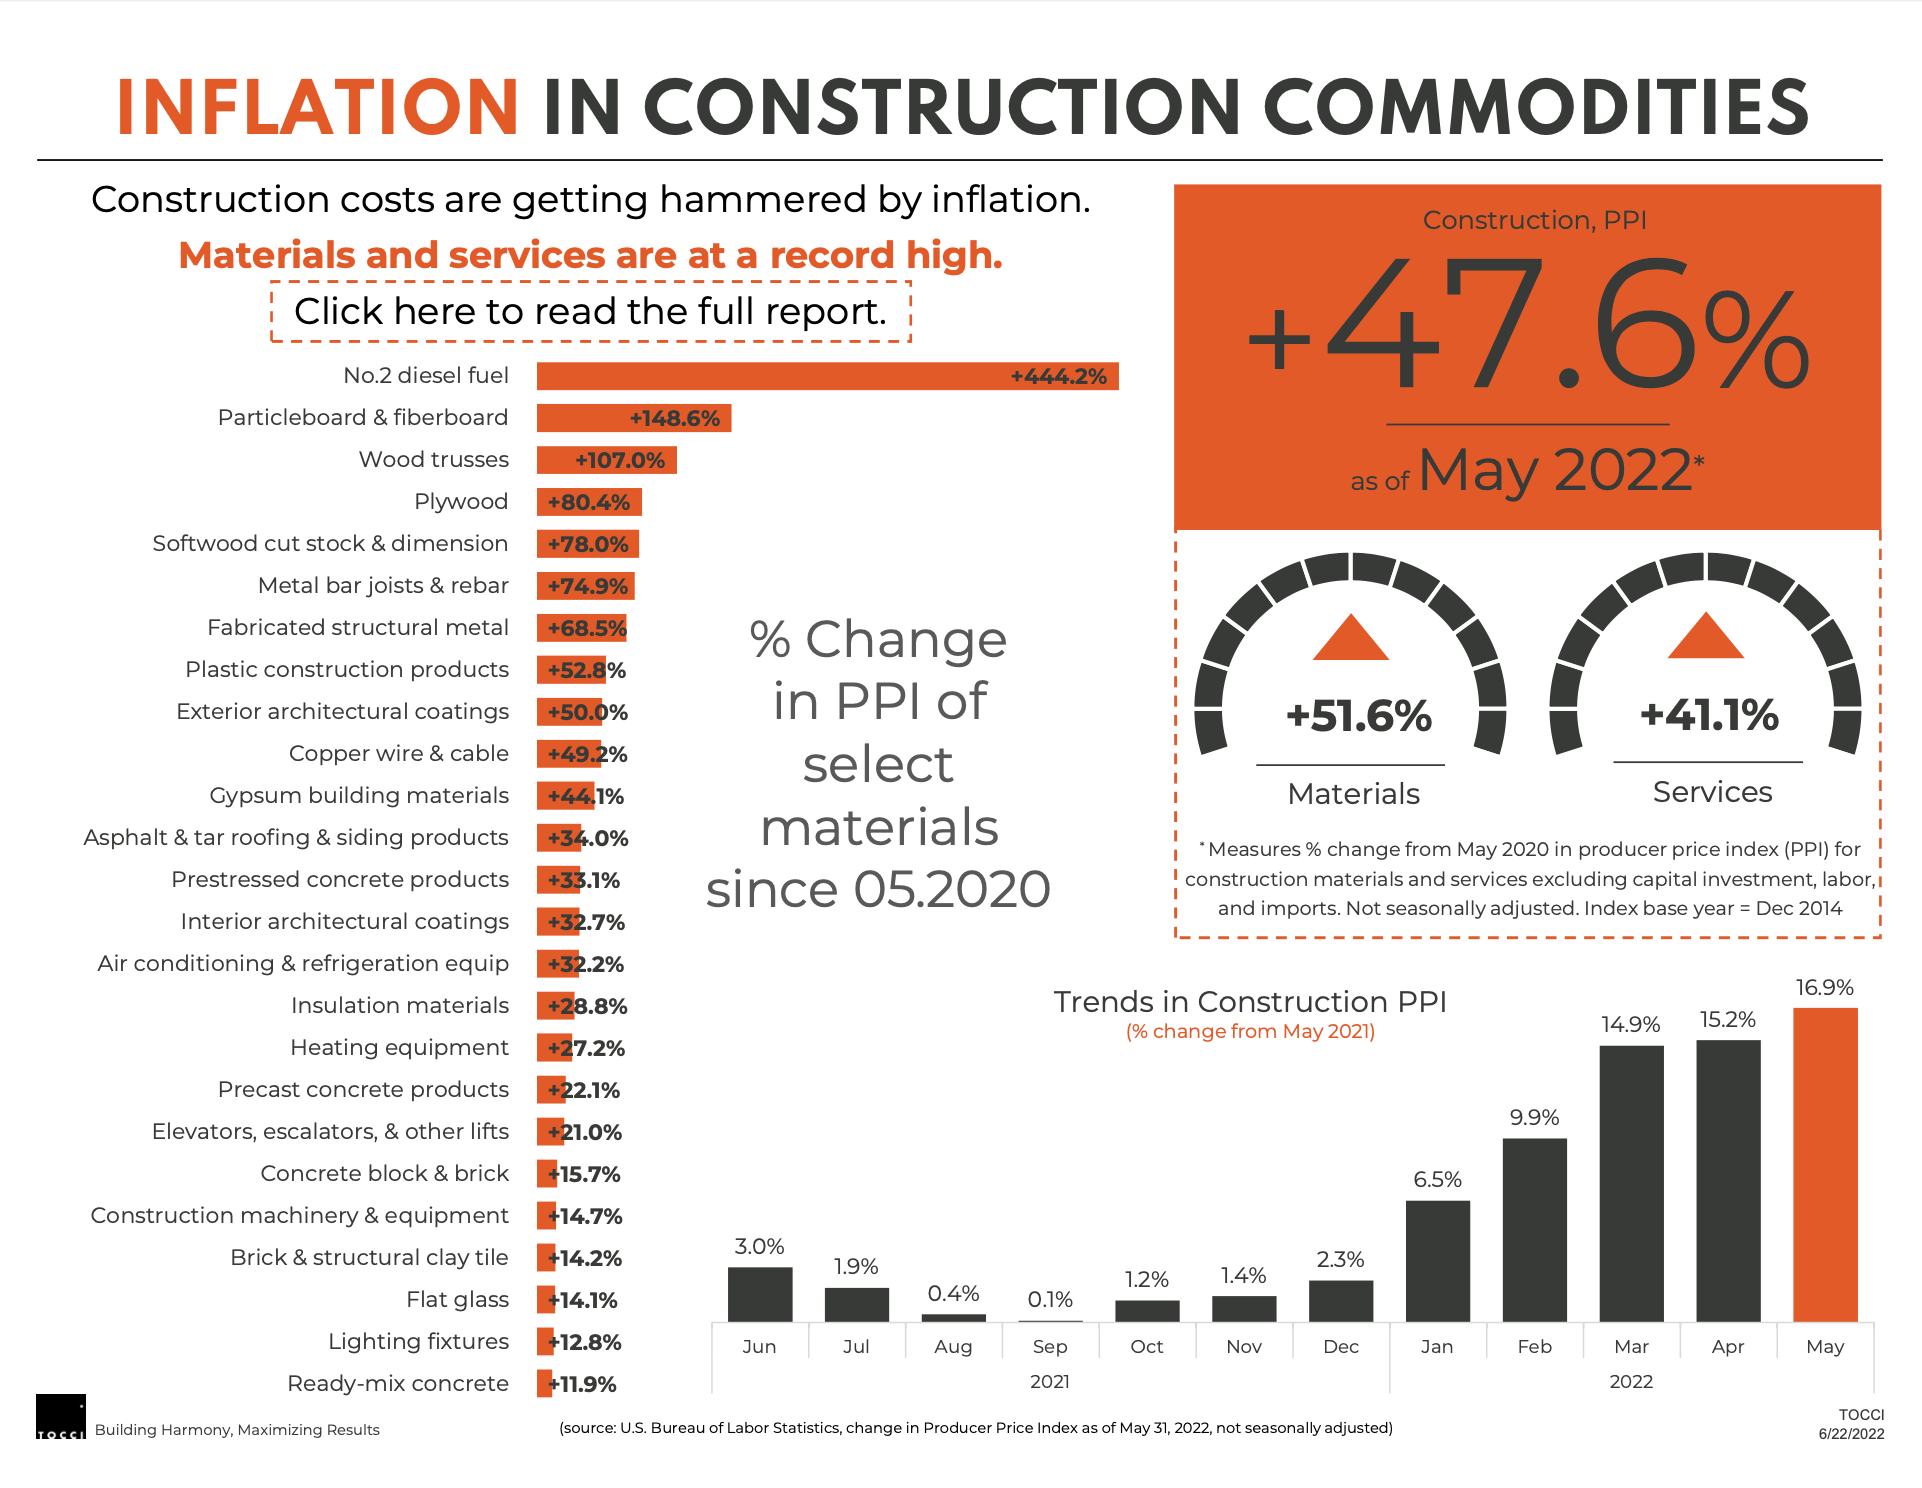 Construction data compiled by Tocci Building Corporation using Bureau of Labor Statistics data